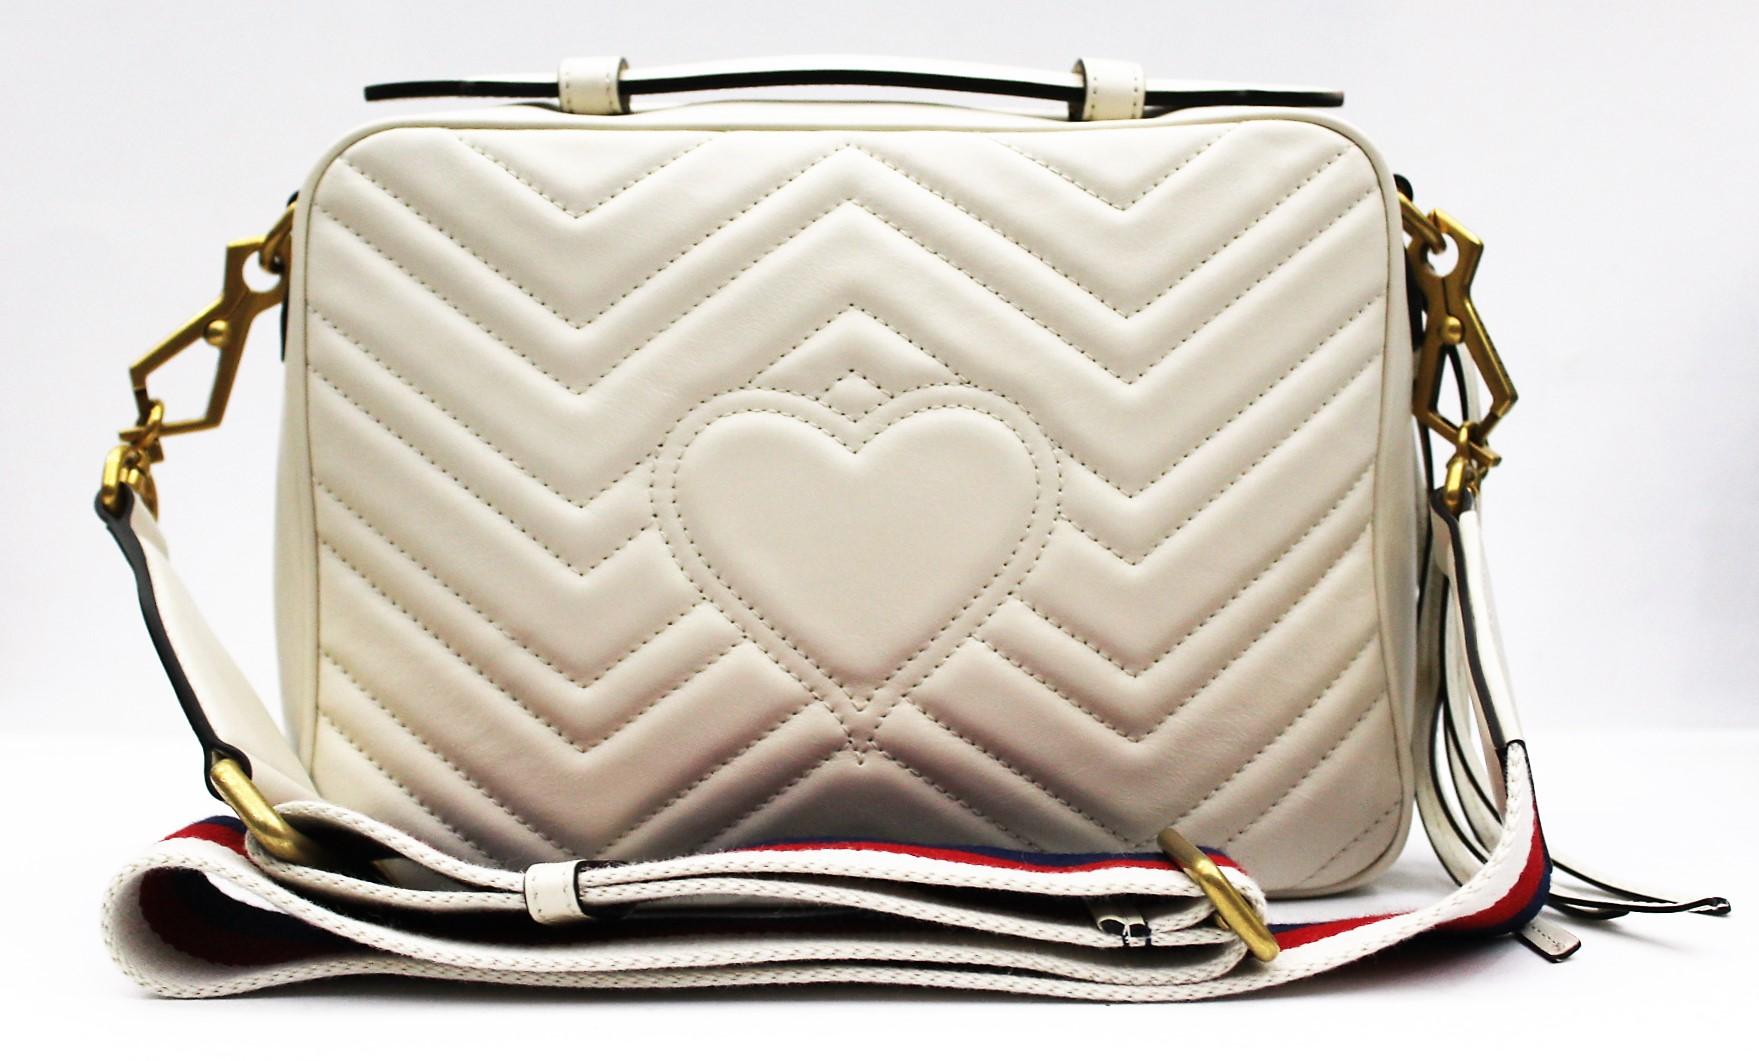 Gucci White Leather Shoulder Marmont Bag 1